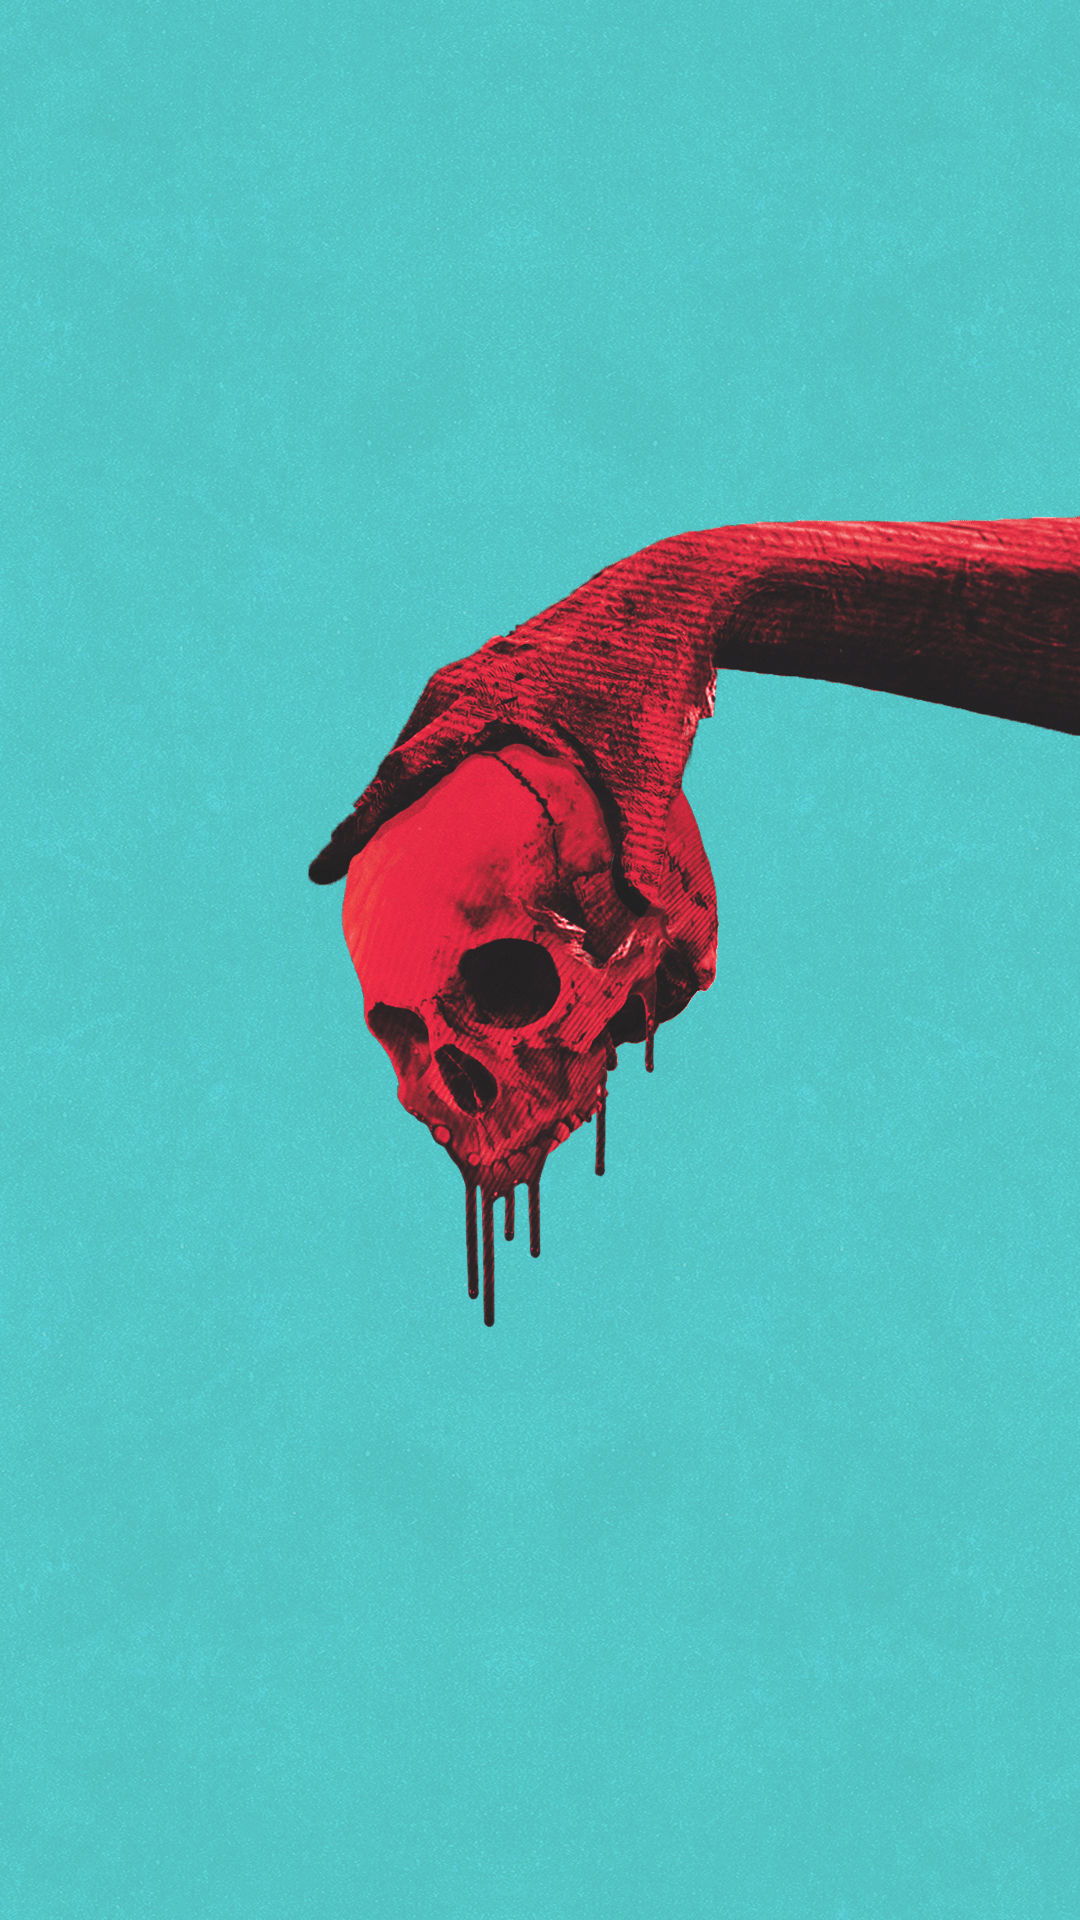 A red hand holds a dripping red skull against a blue background - Skull